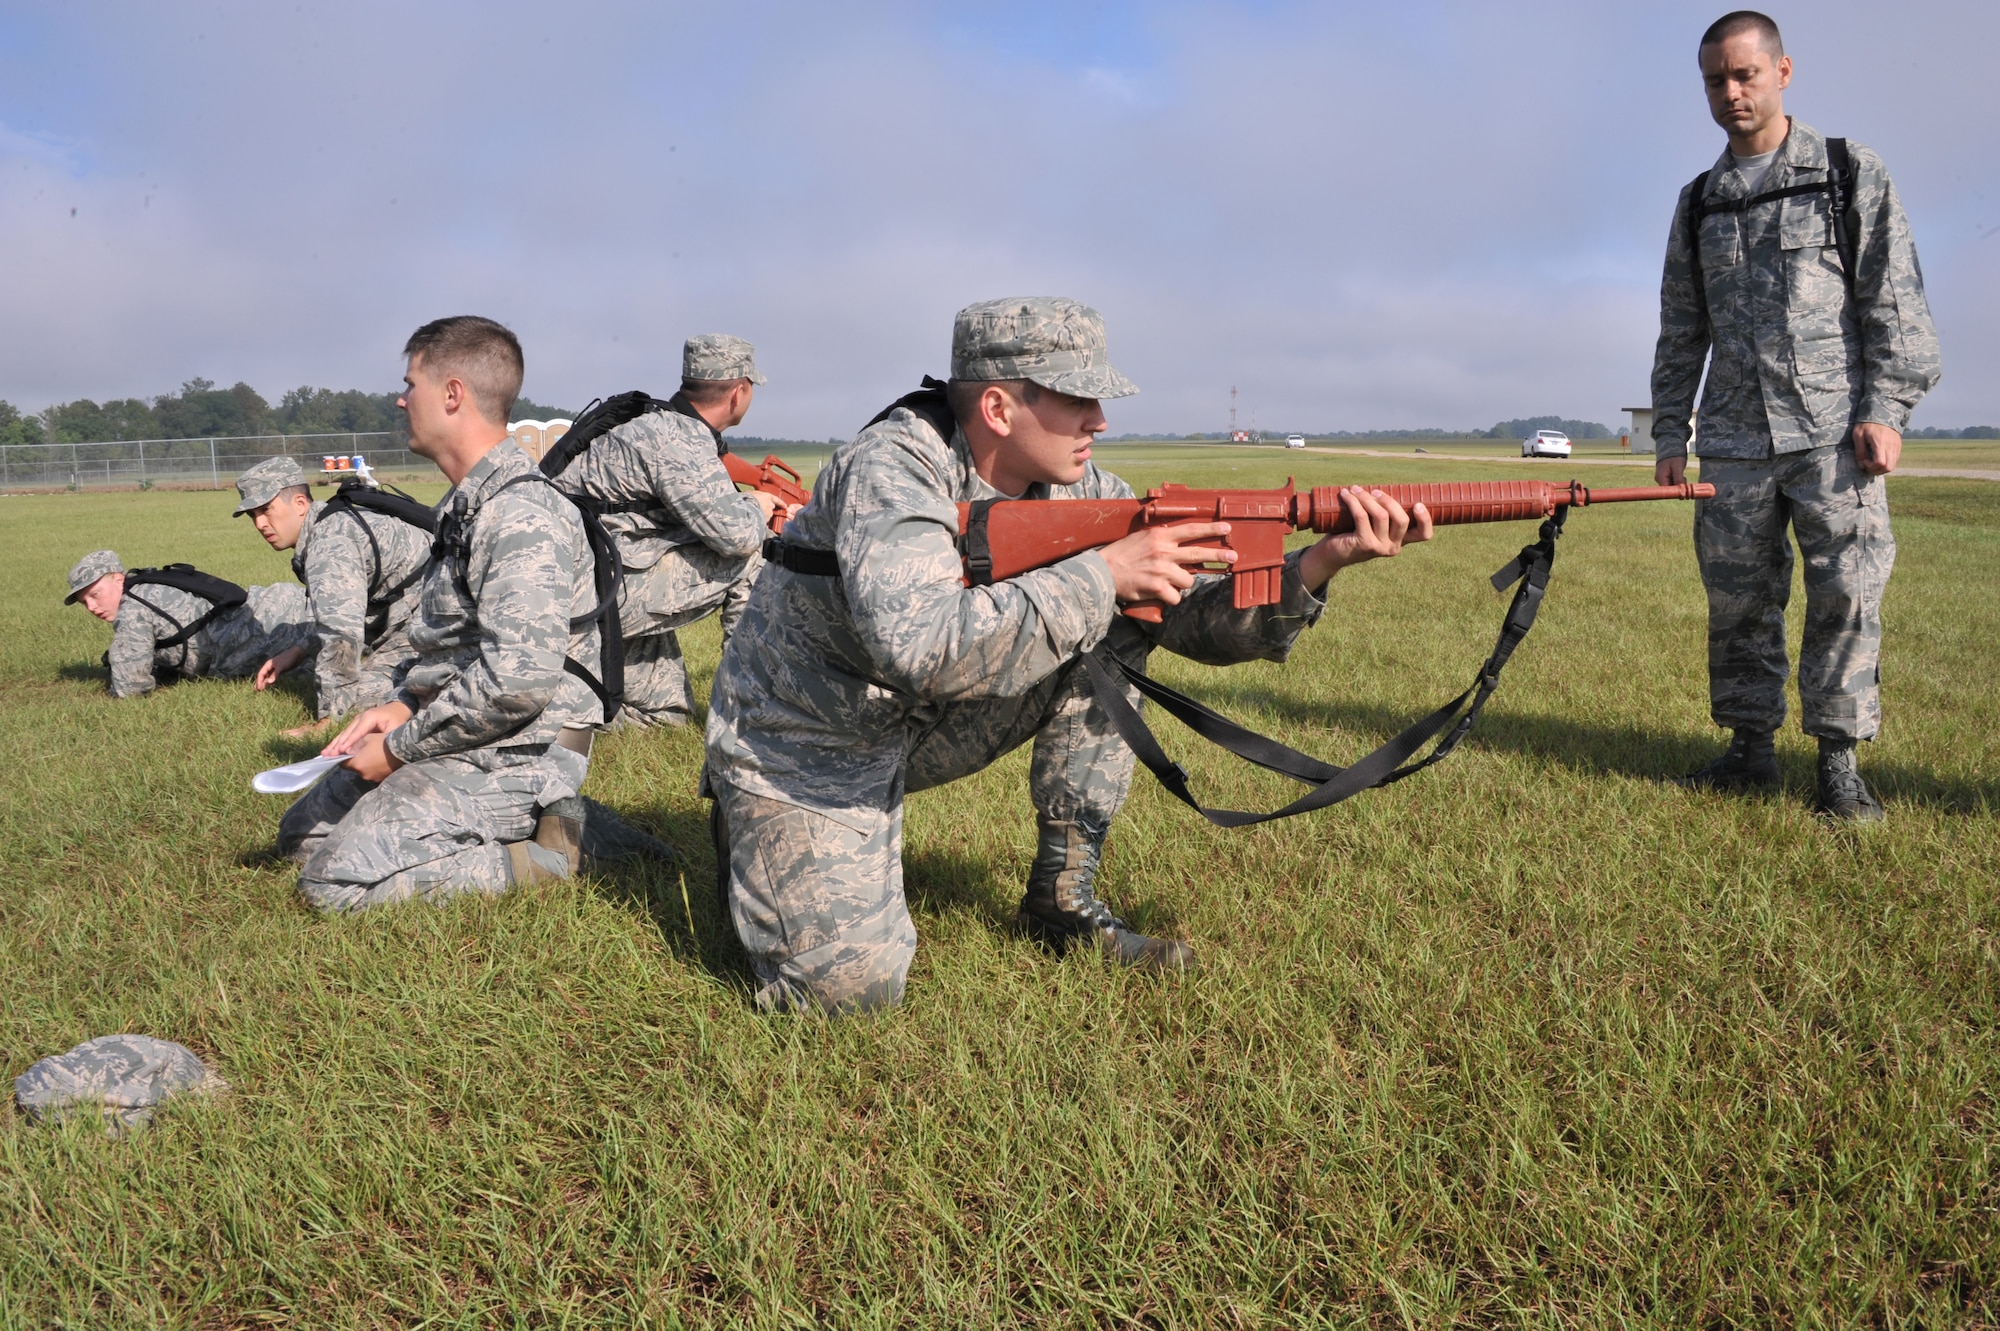 Officer Training School trainees participate in a BELPS exercise during their third week of training at Maxwell Air Force Base, Oct. 3. This exercise required trainees to move as a group without verbally communicating. (U.S. Air Force photo by Airman 1st Class William Blankenship)